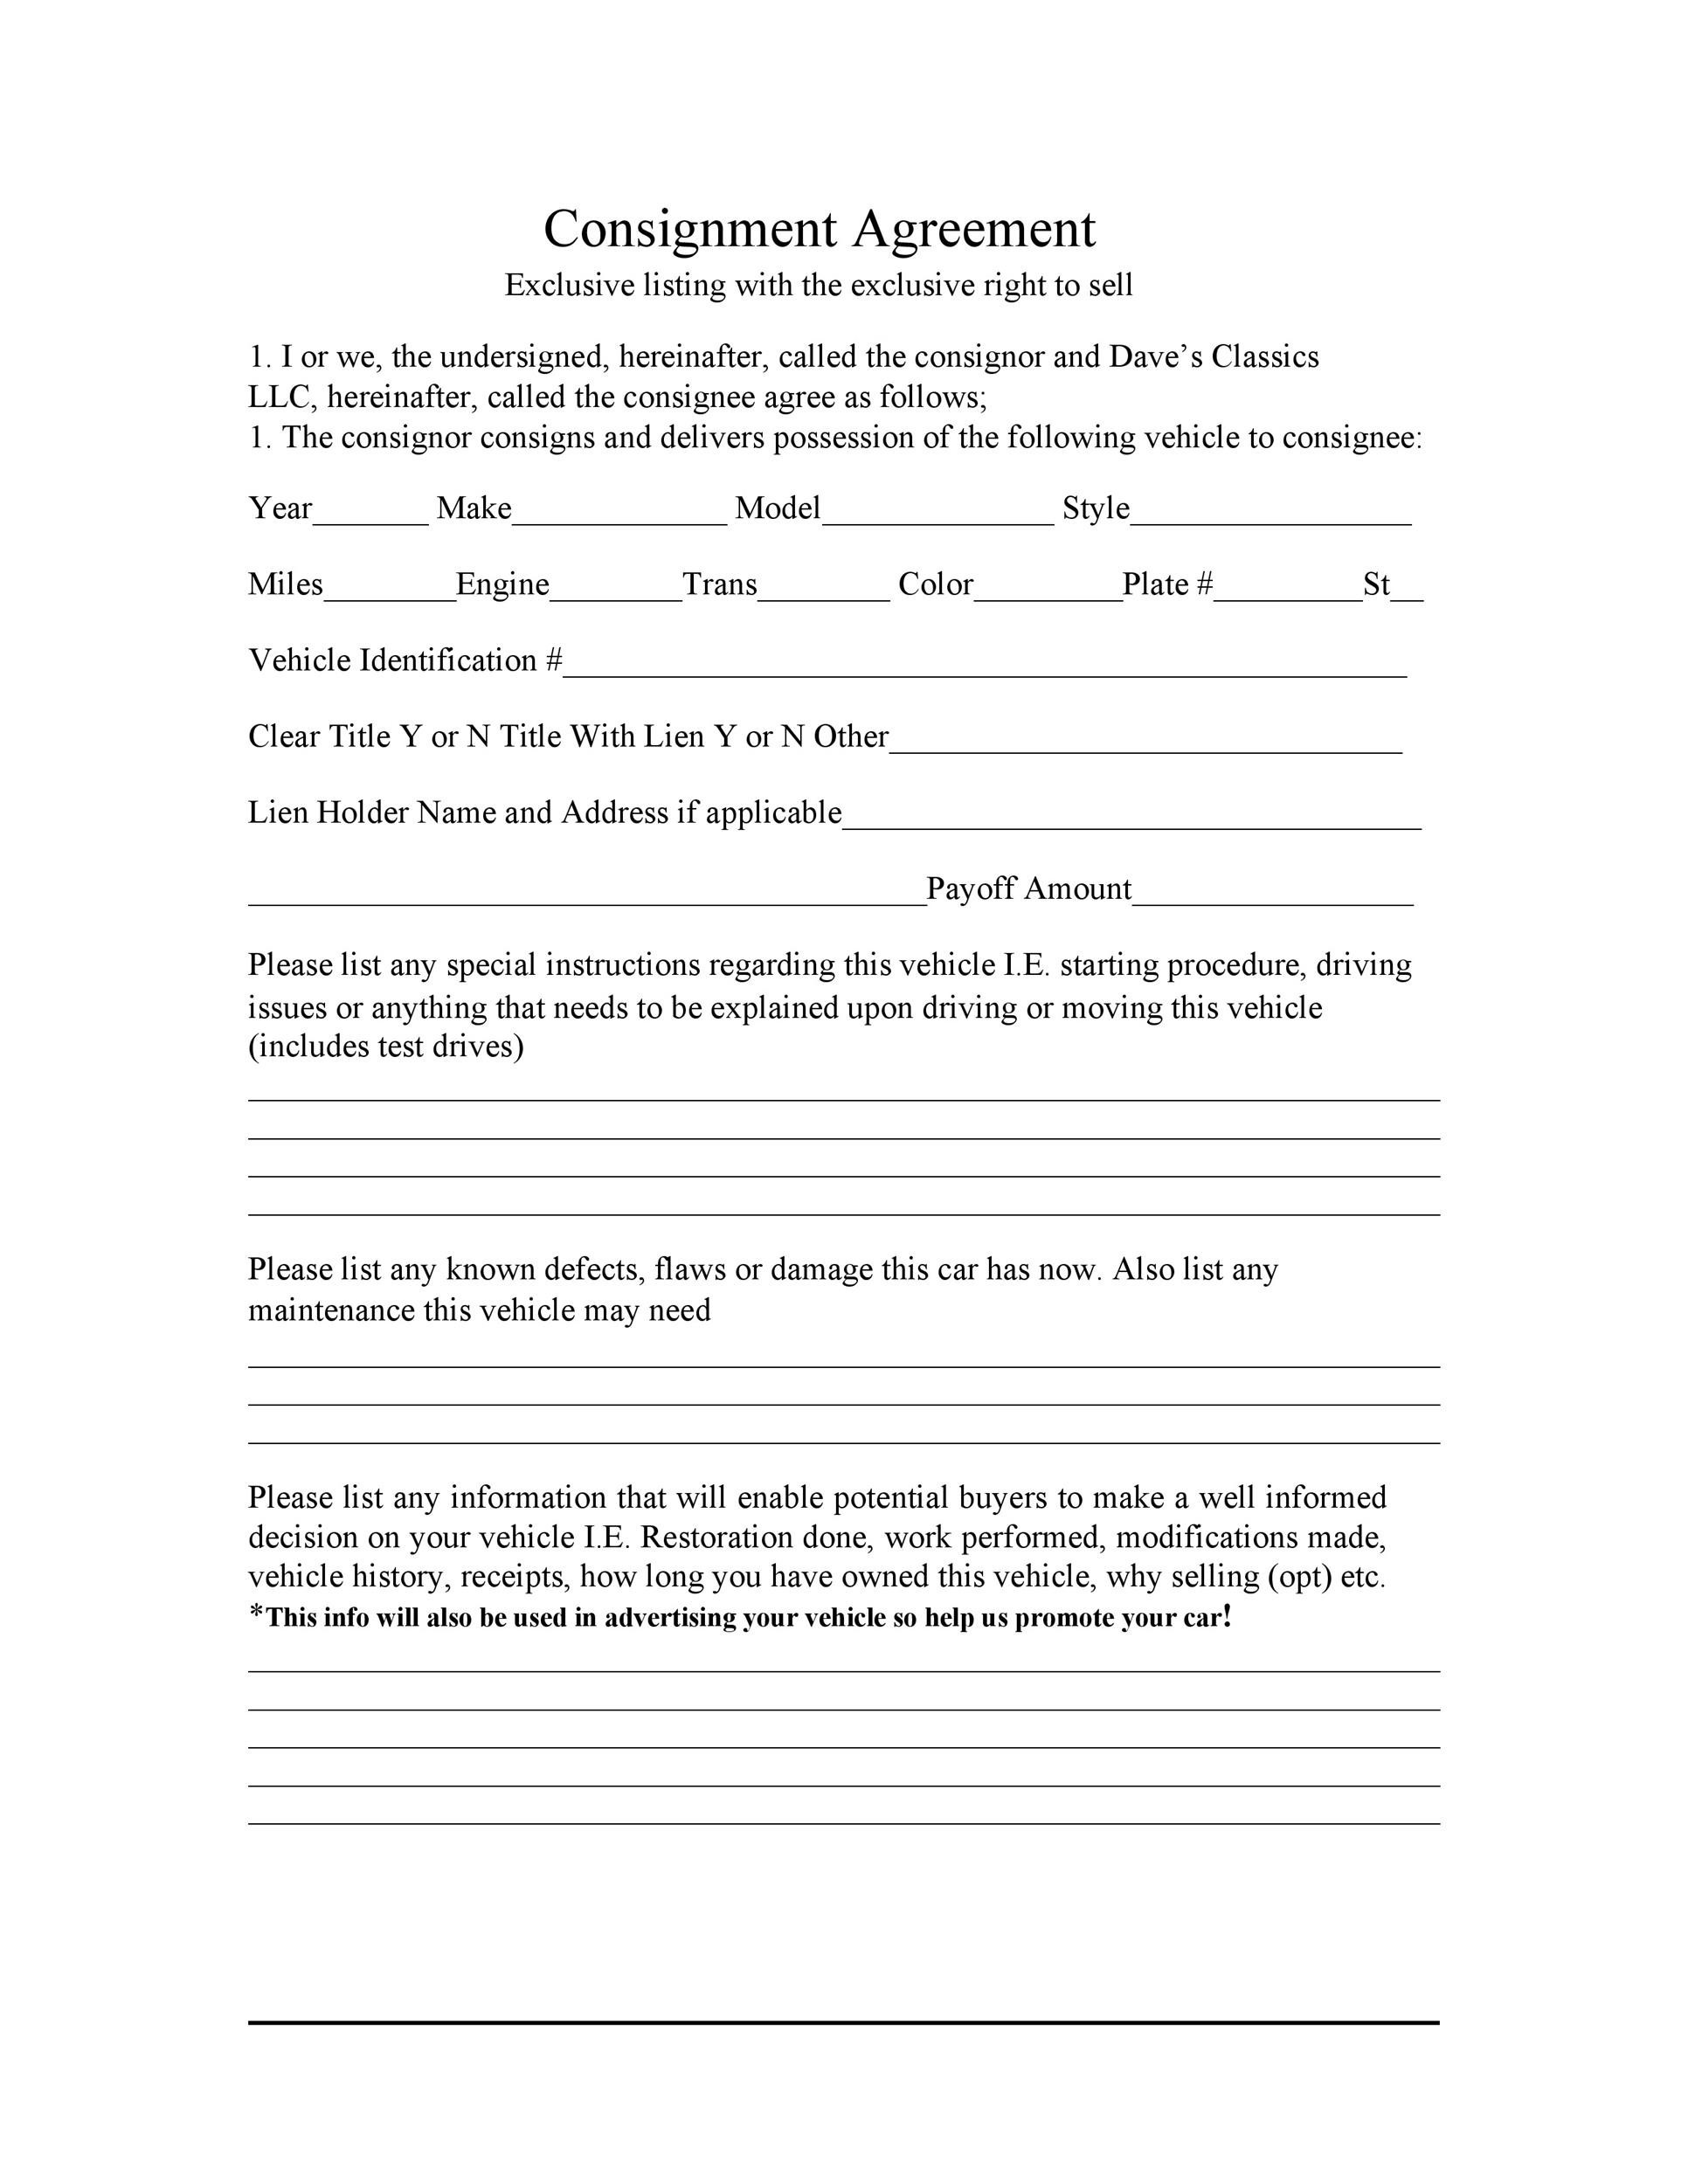 Free Consignment Agreement Template 39